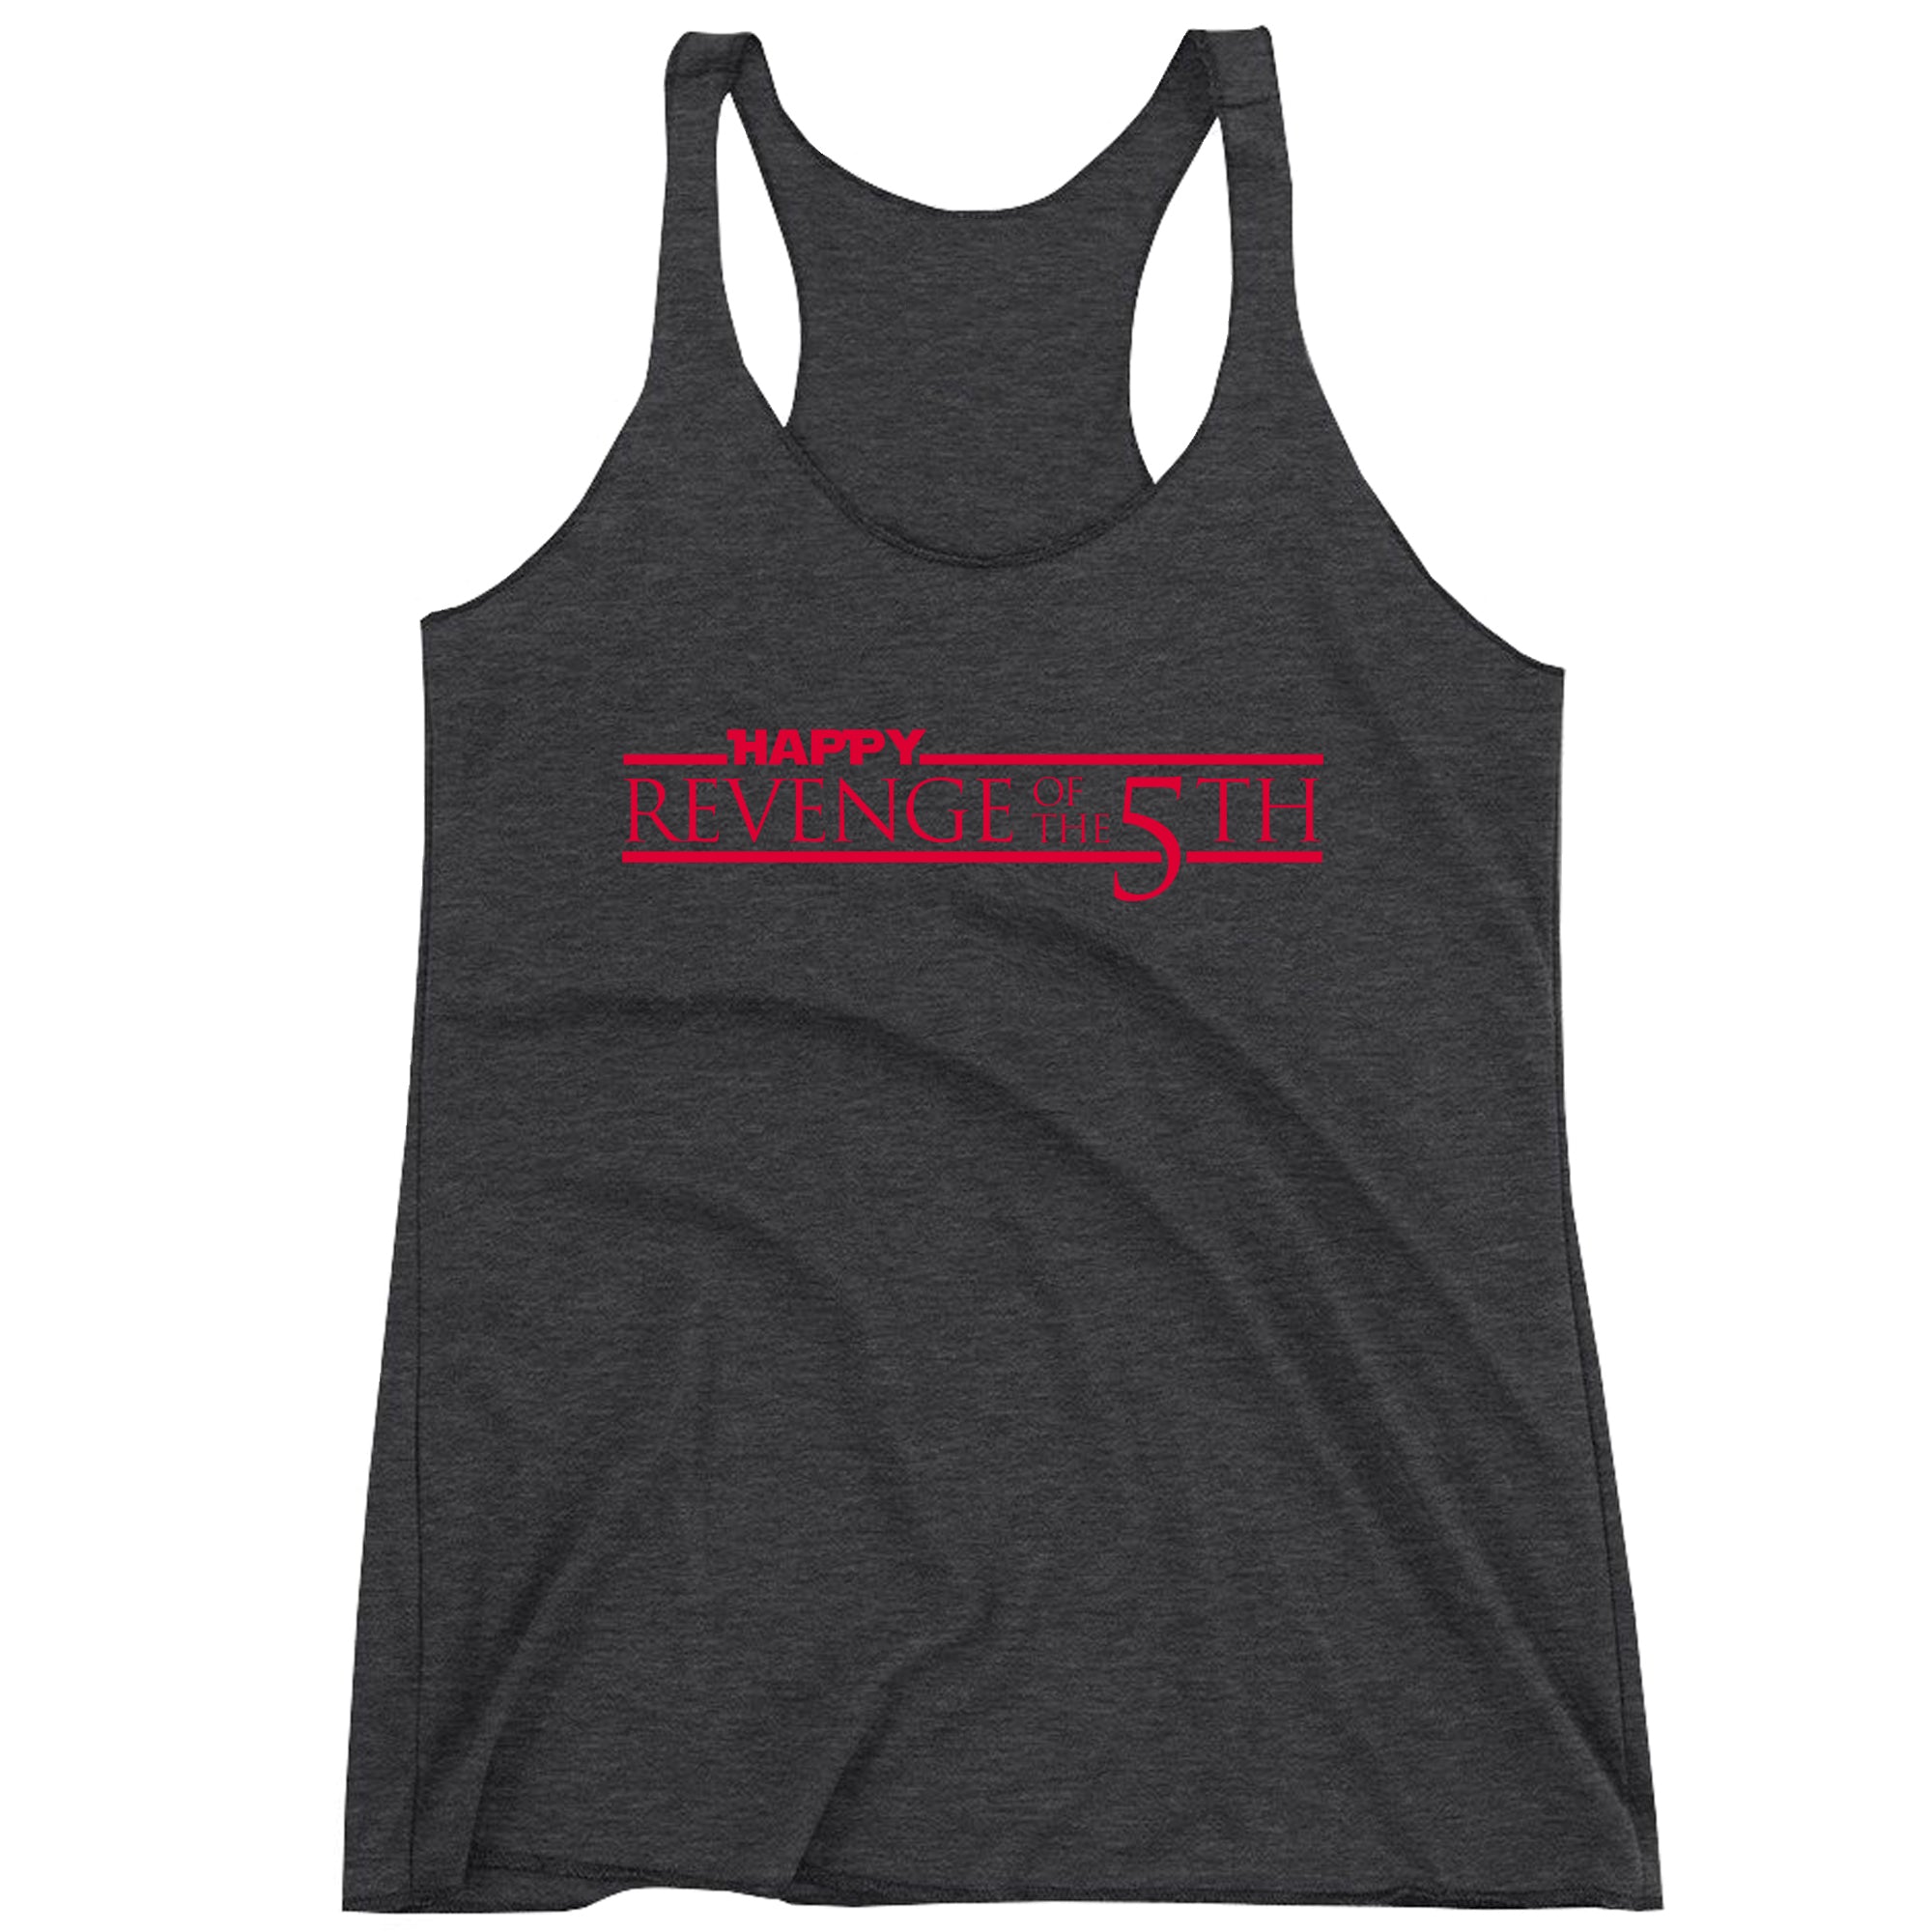 evenge of the 5th Fifth Women's Racerback Tank